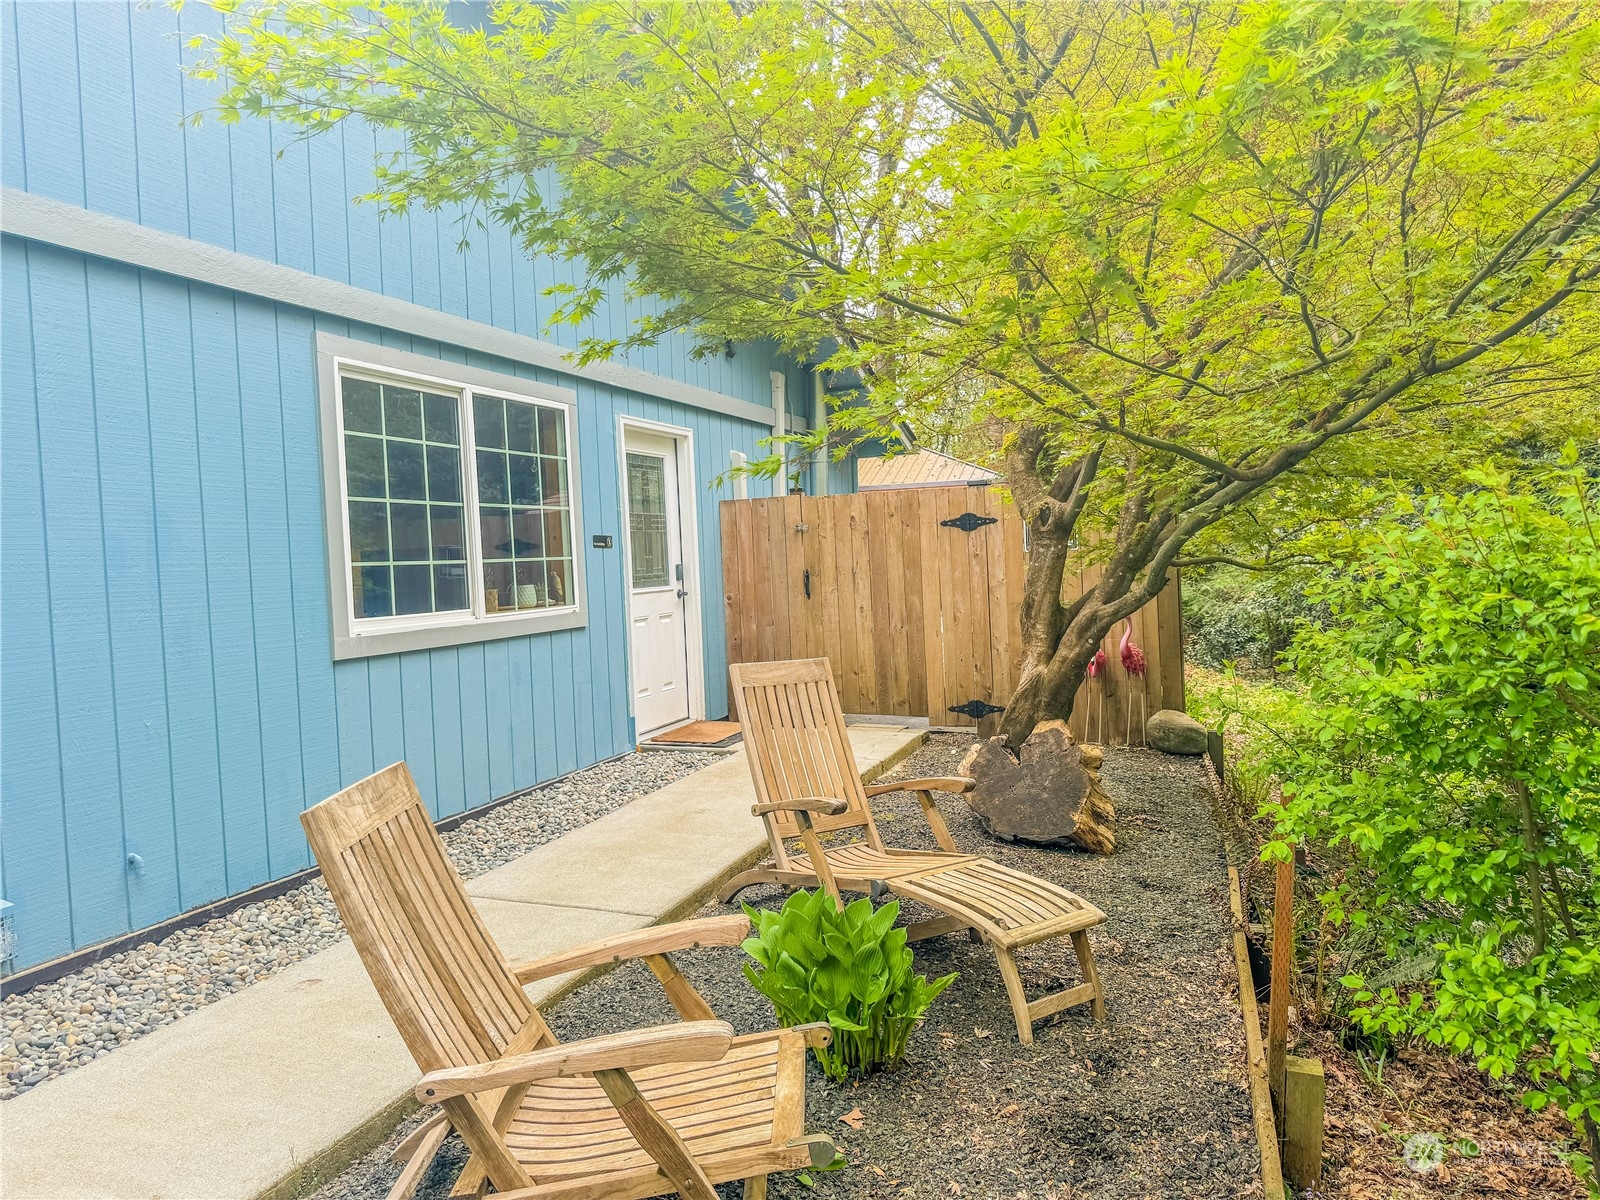 a view of backyard with outdoor seating and plants